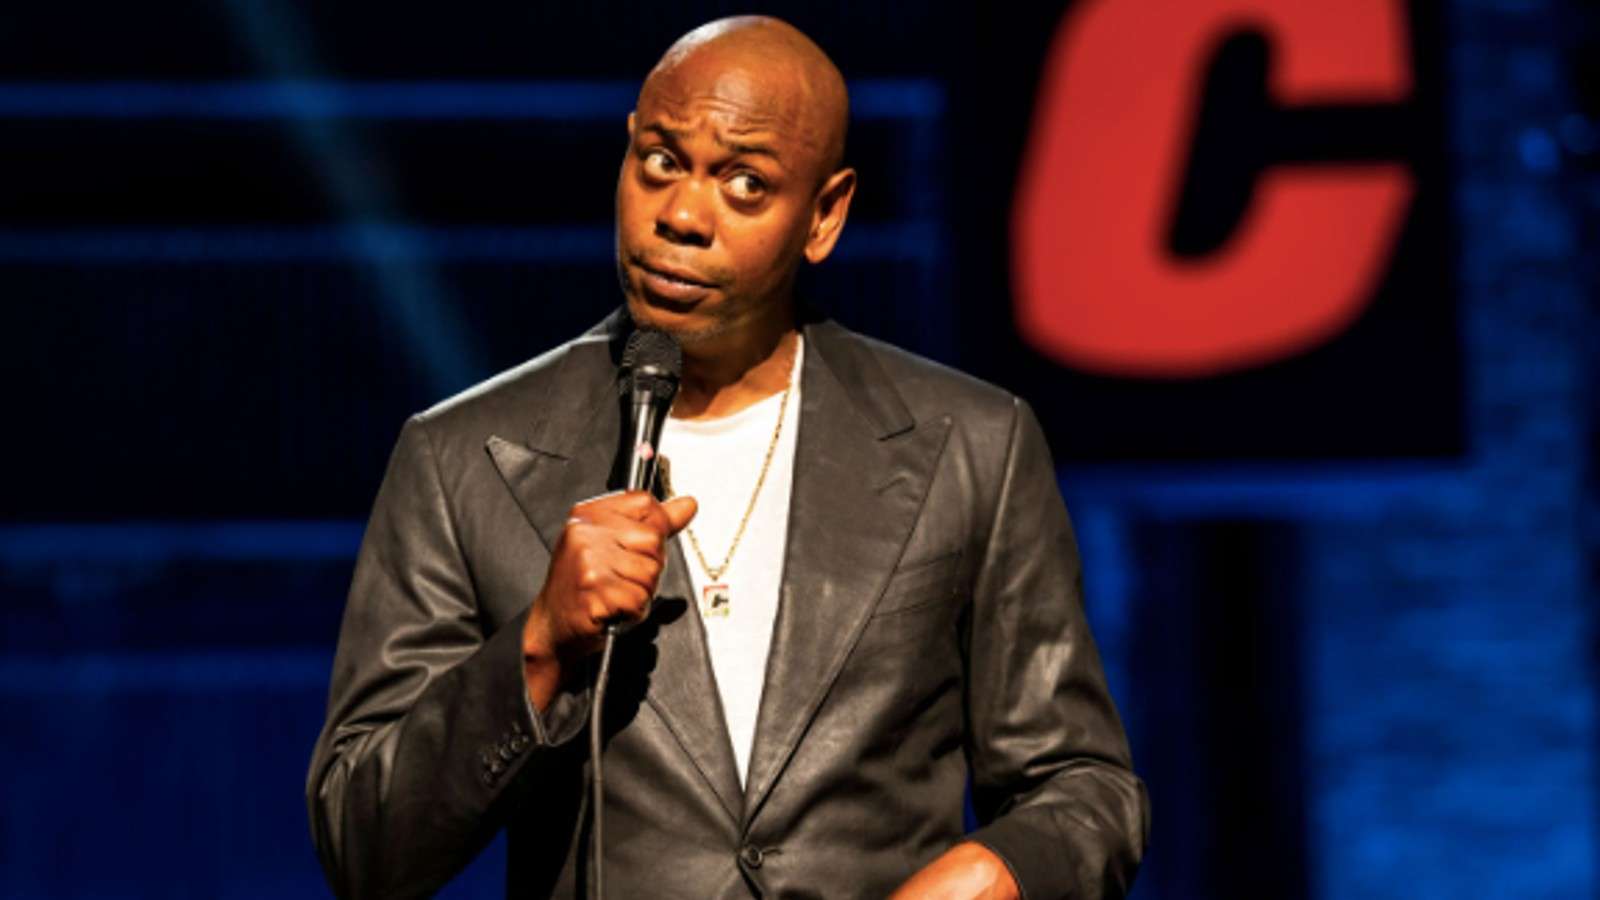 Dave Chappelle during his special The Closer